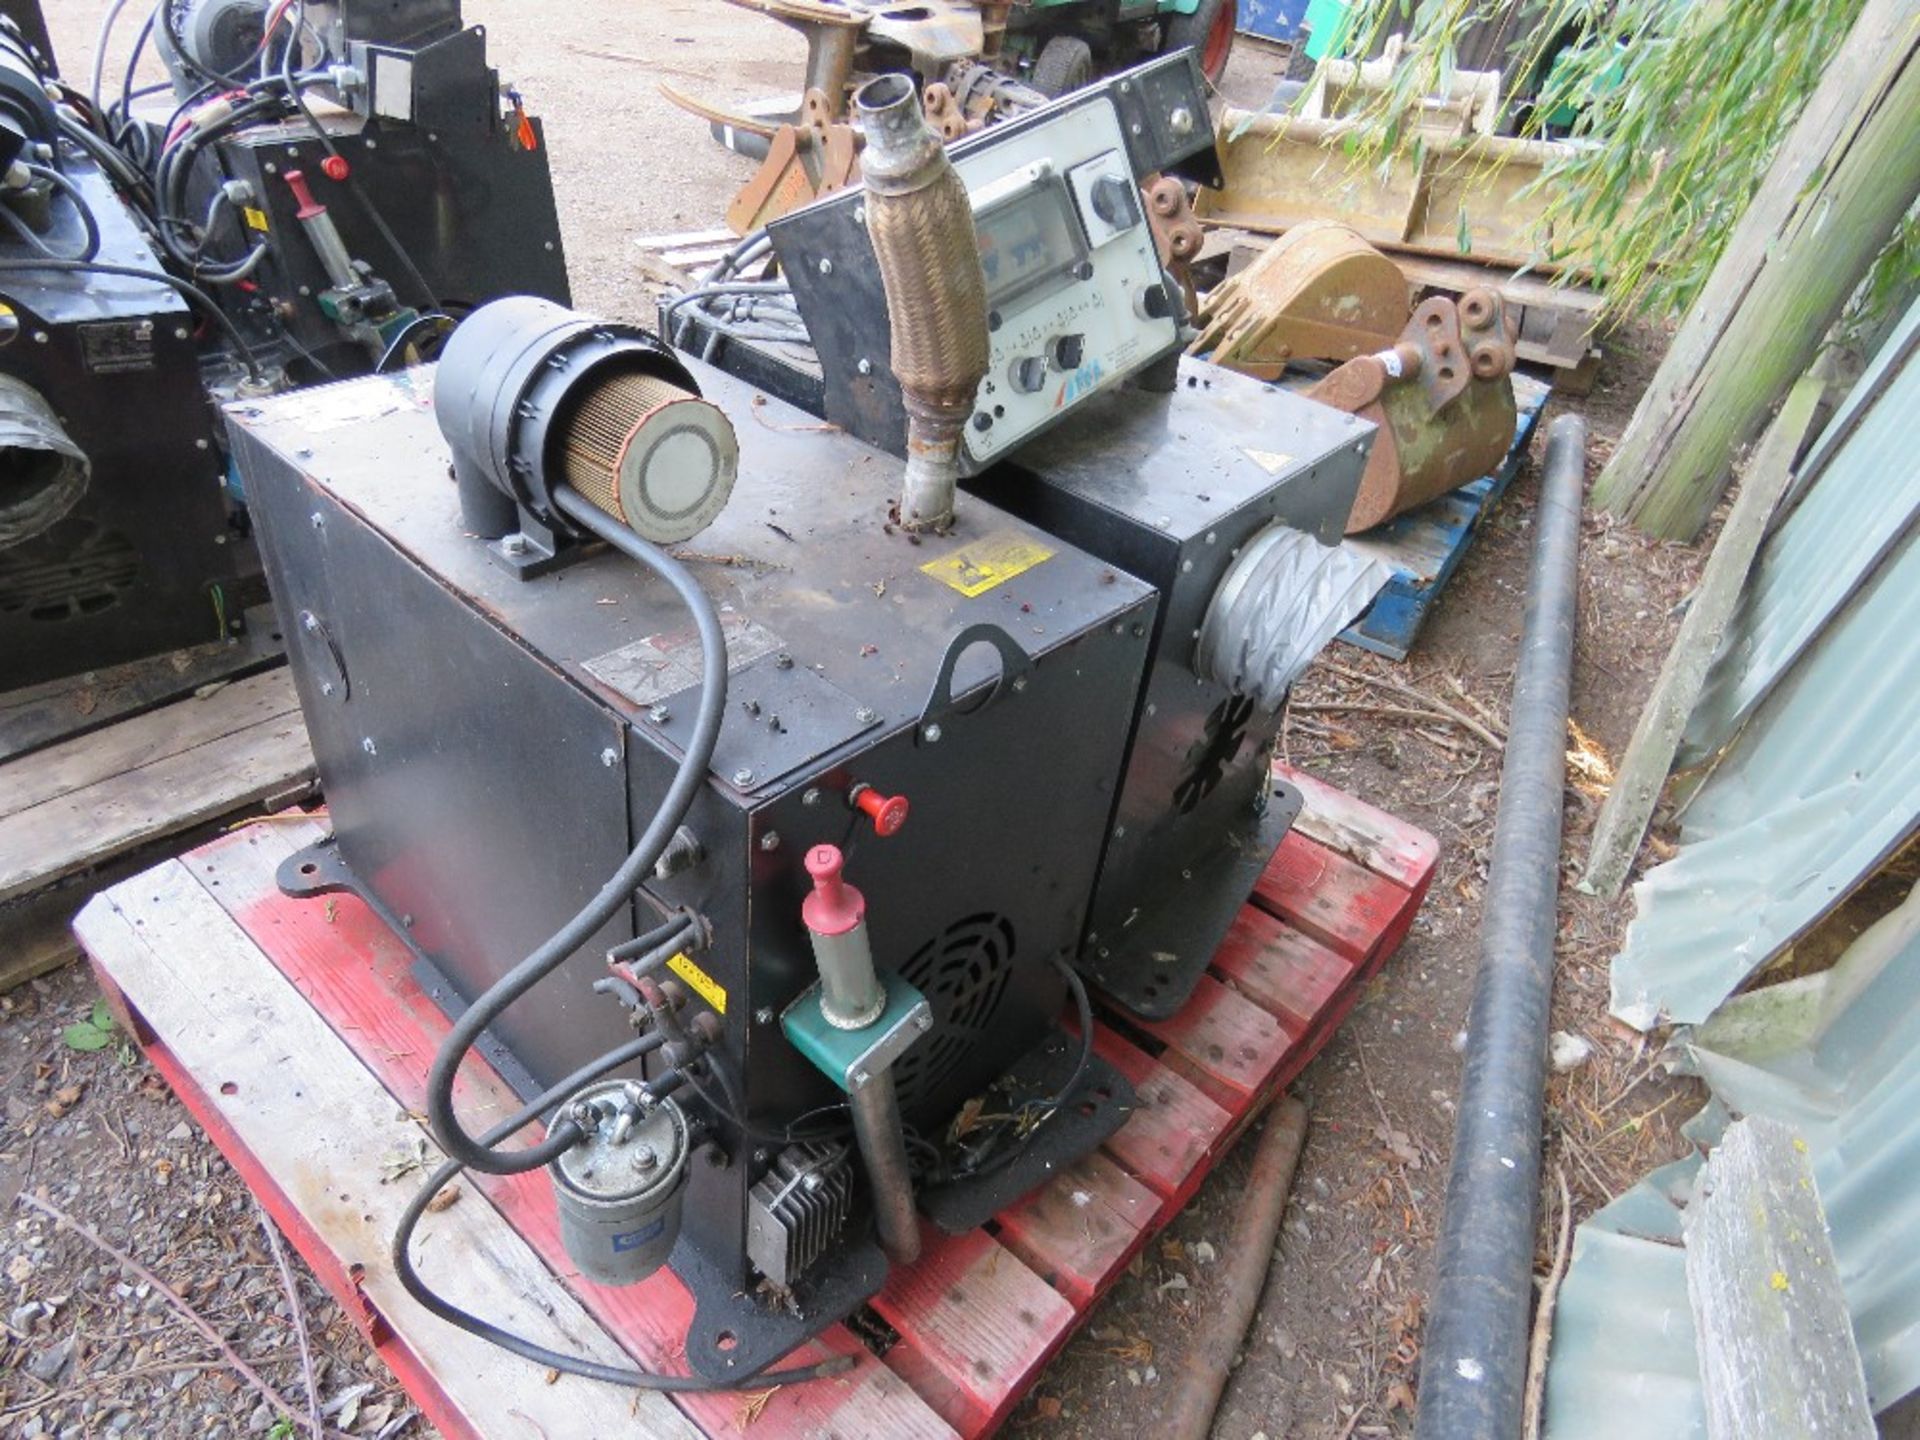 2 X HATZ DIESEL ENGINED GENERATOR SETS, 3.1KW OUTPUT. EX LIGHTING TOWERS. - Image 4 of 5